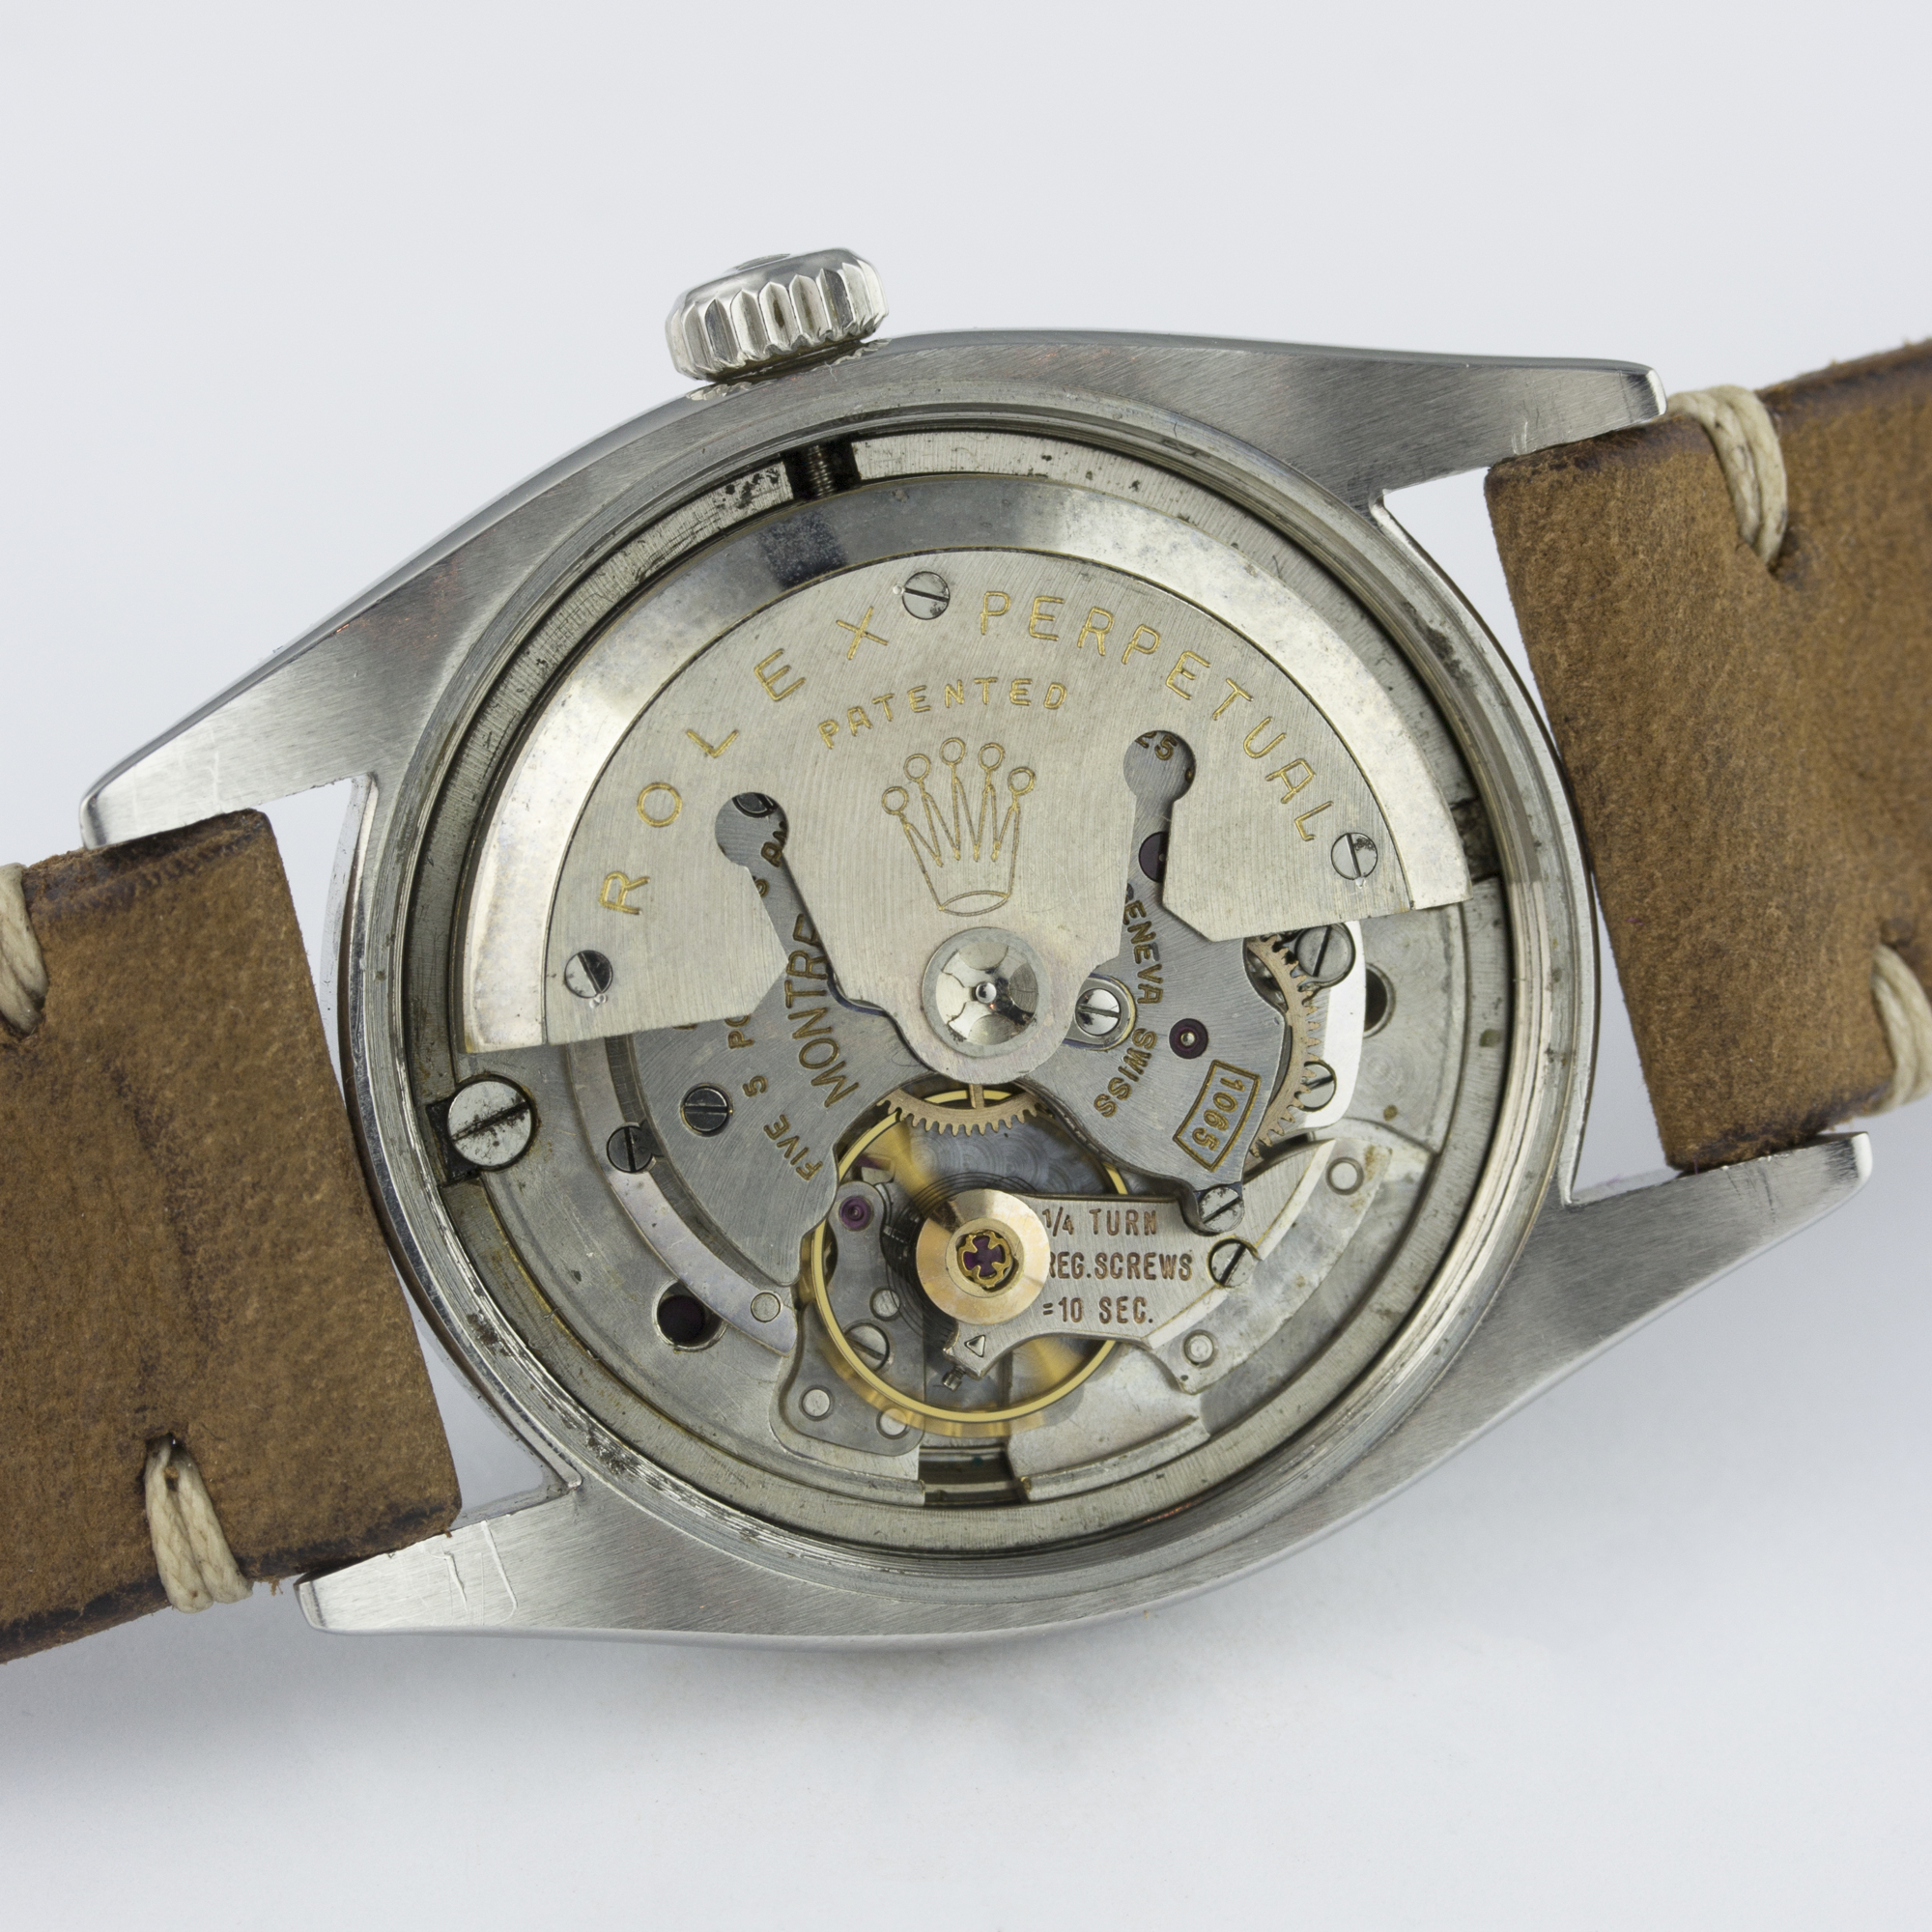 A RARE GENTLEMAN'S STAINLESS STEEL ROLEX OYSTER PERPETUAL DATEJUST WRIST WATCH CIRCA 1960, REF. 6605 - Image 8 of 9